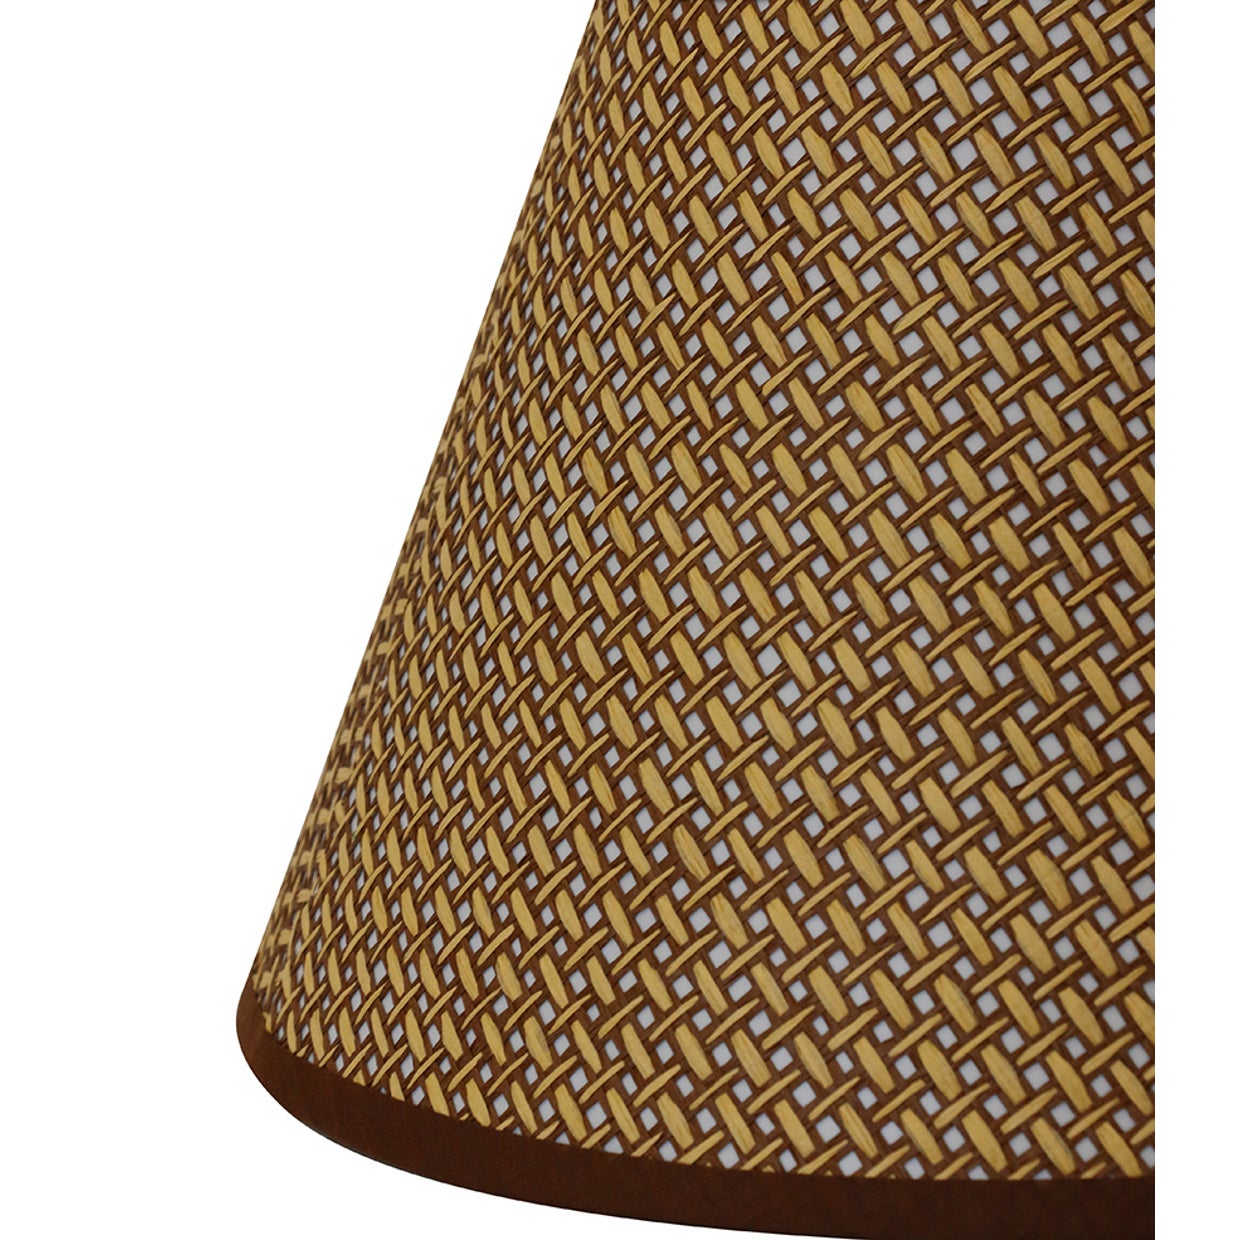 Ivory & Linseed Weave 31cm Lampshade